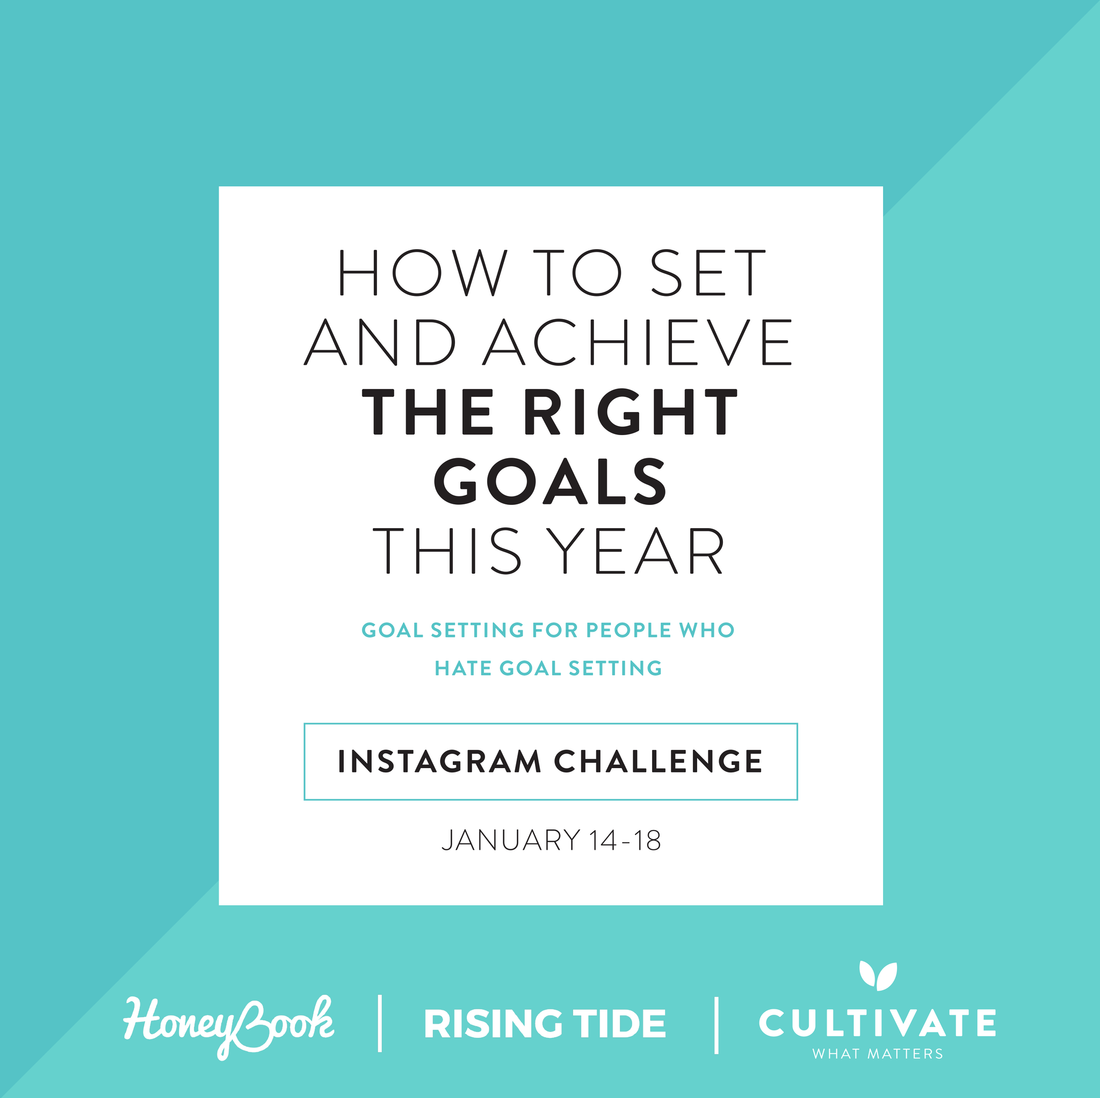 FREE Webinar and Instagram Challenge with The Rising Tide Society + HoneyBook!